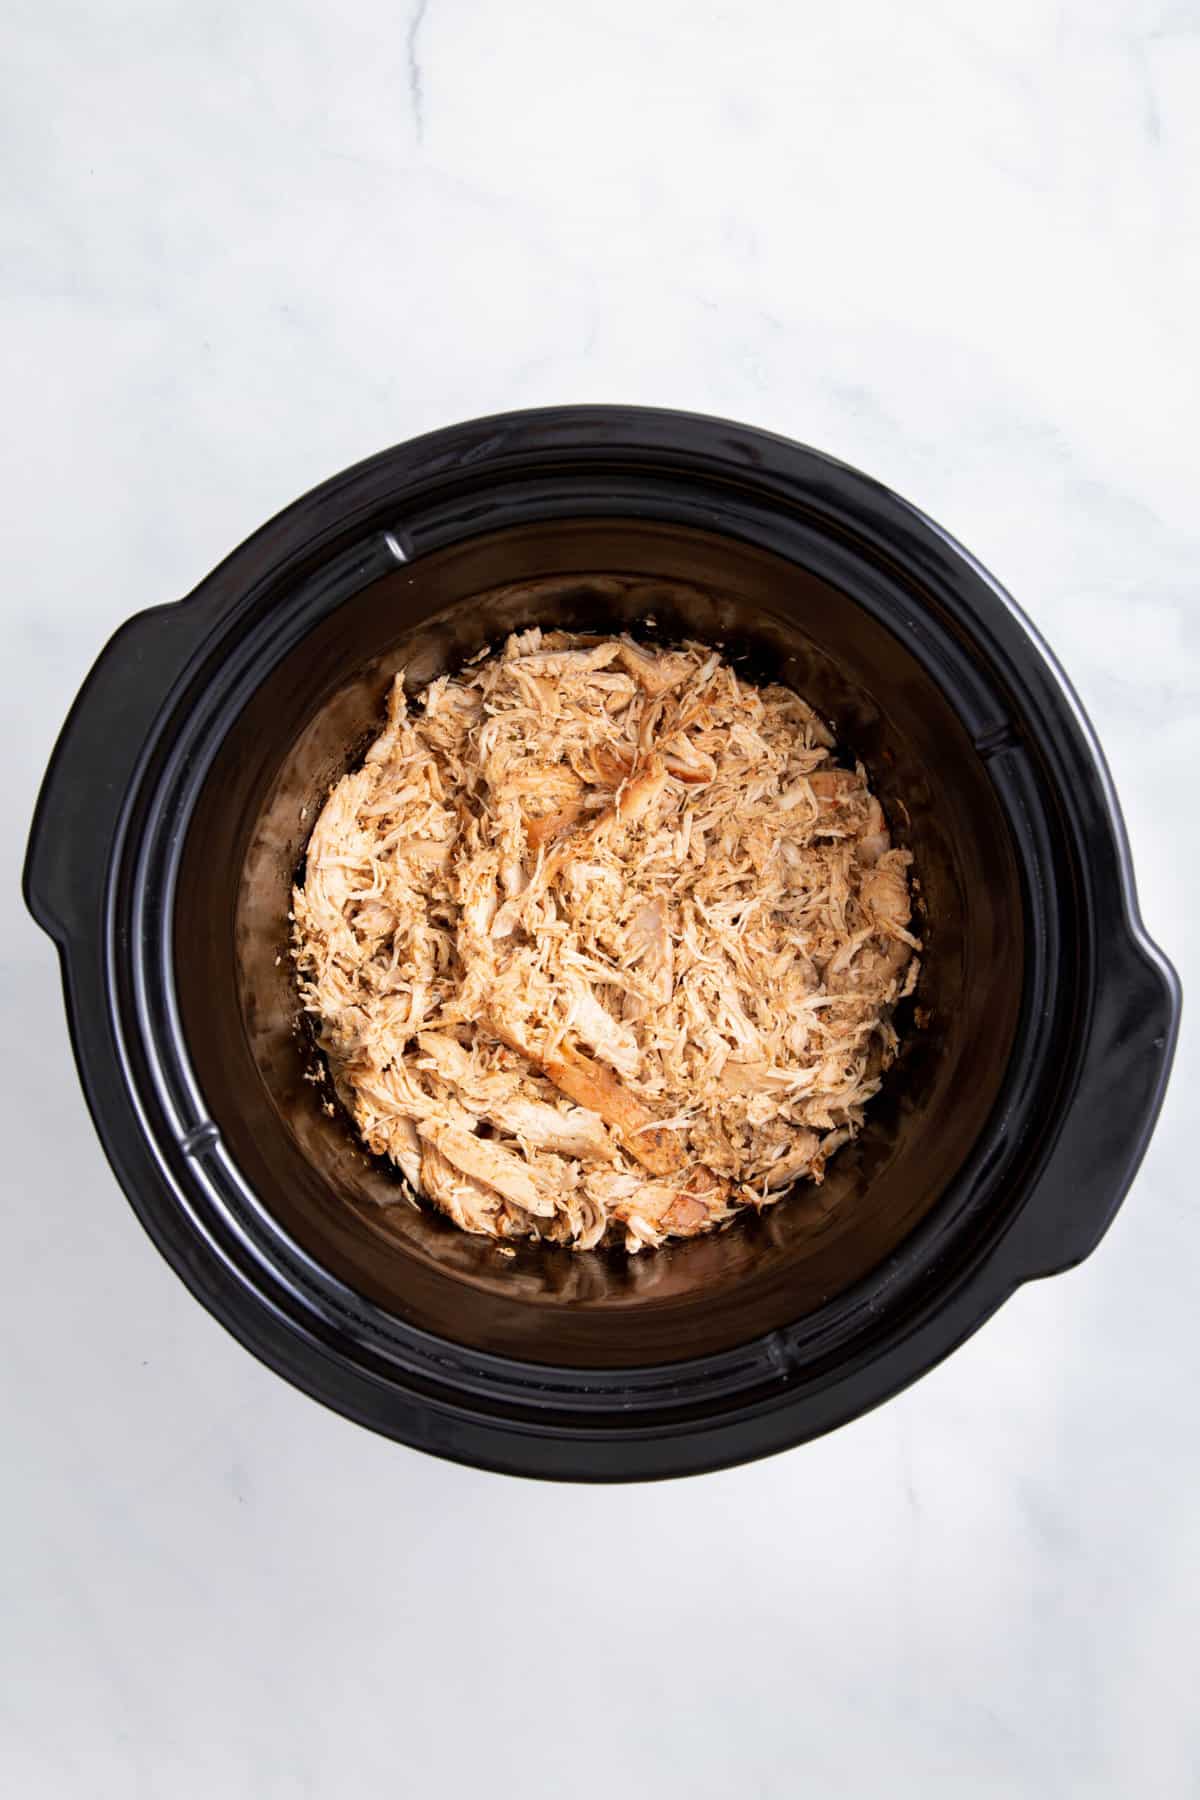 cooked shredded chicken in a slow cooker